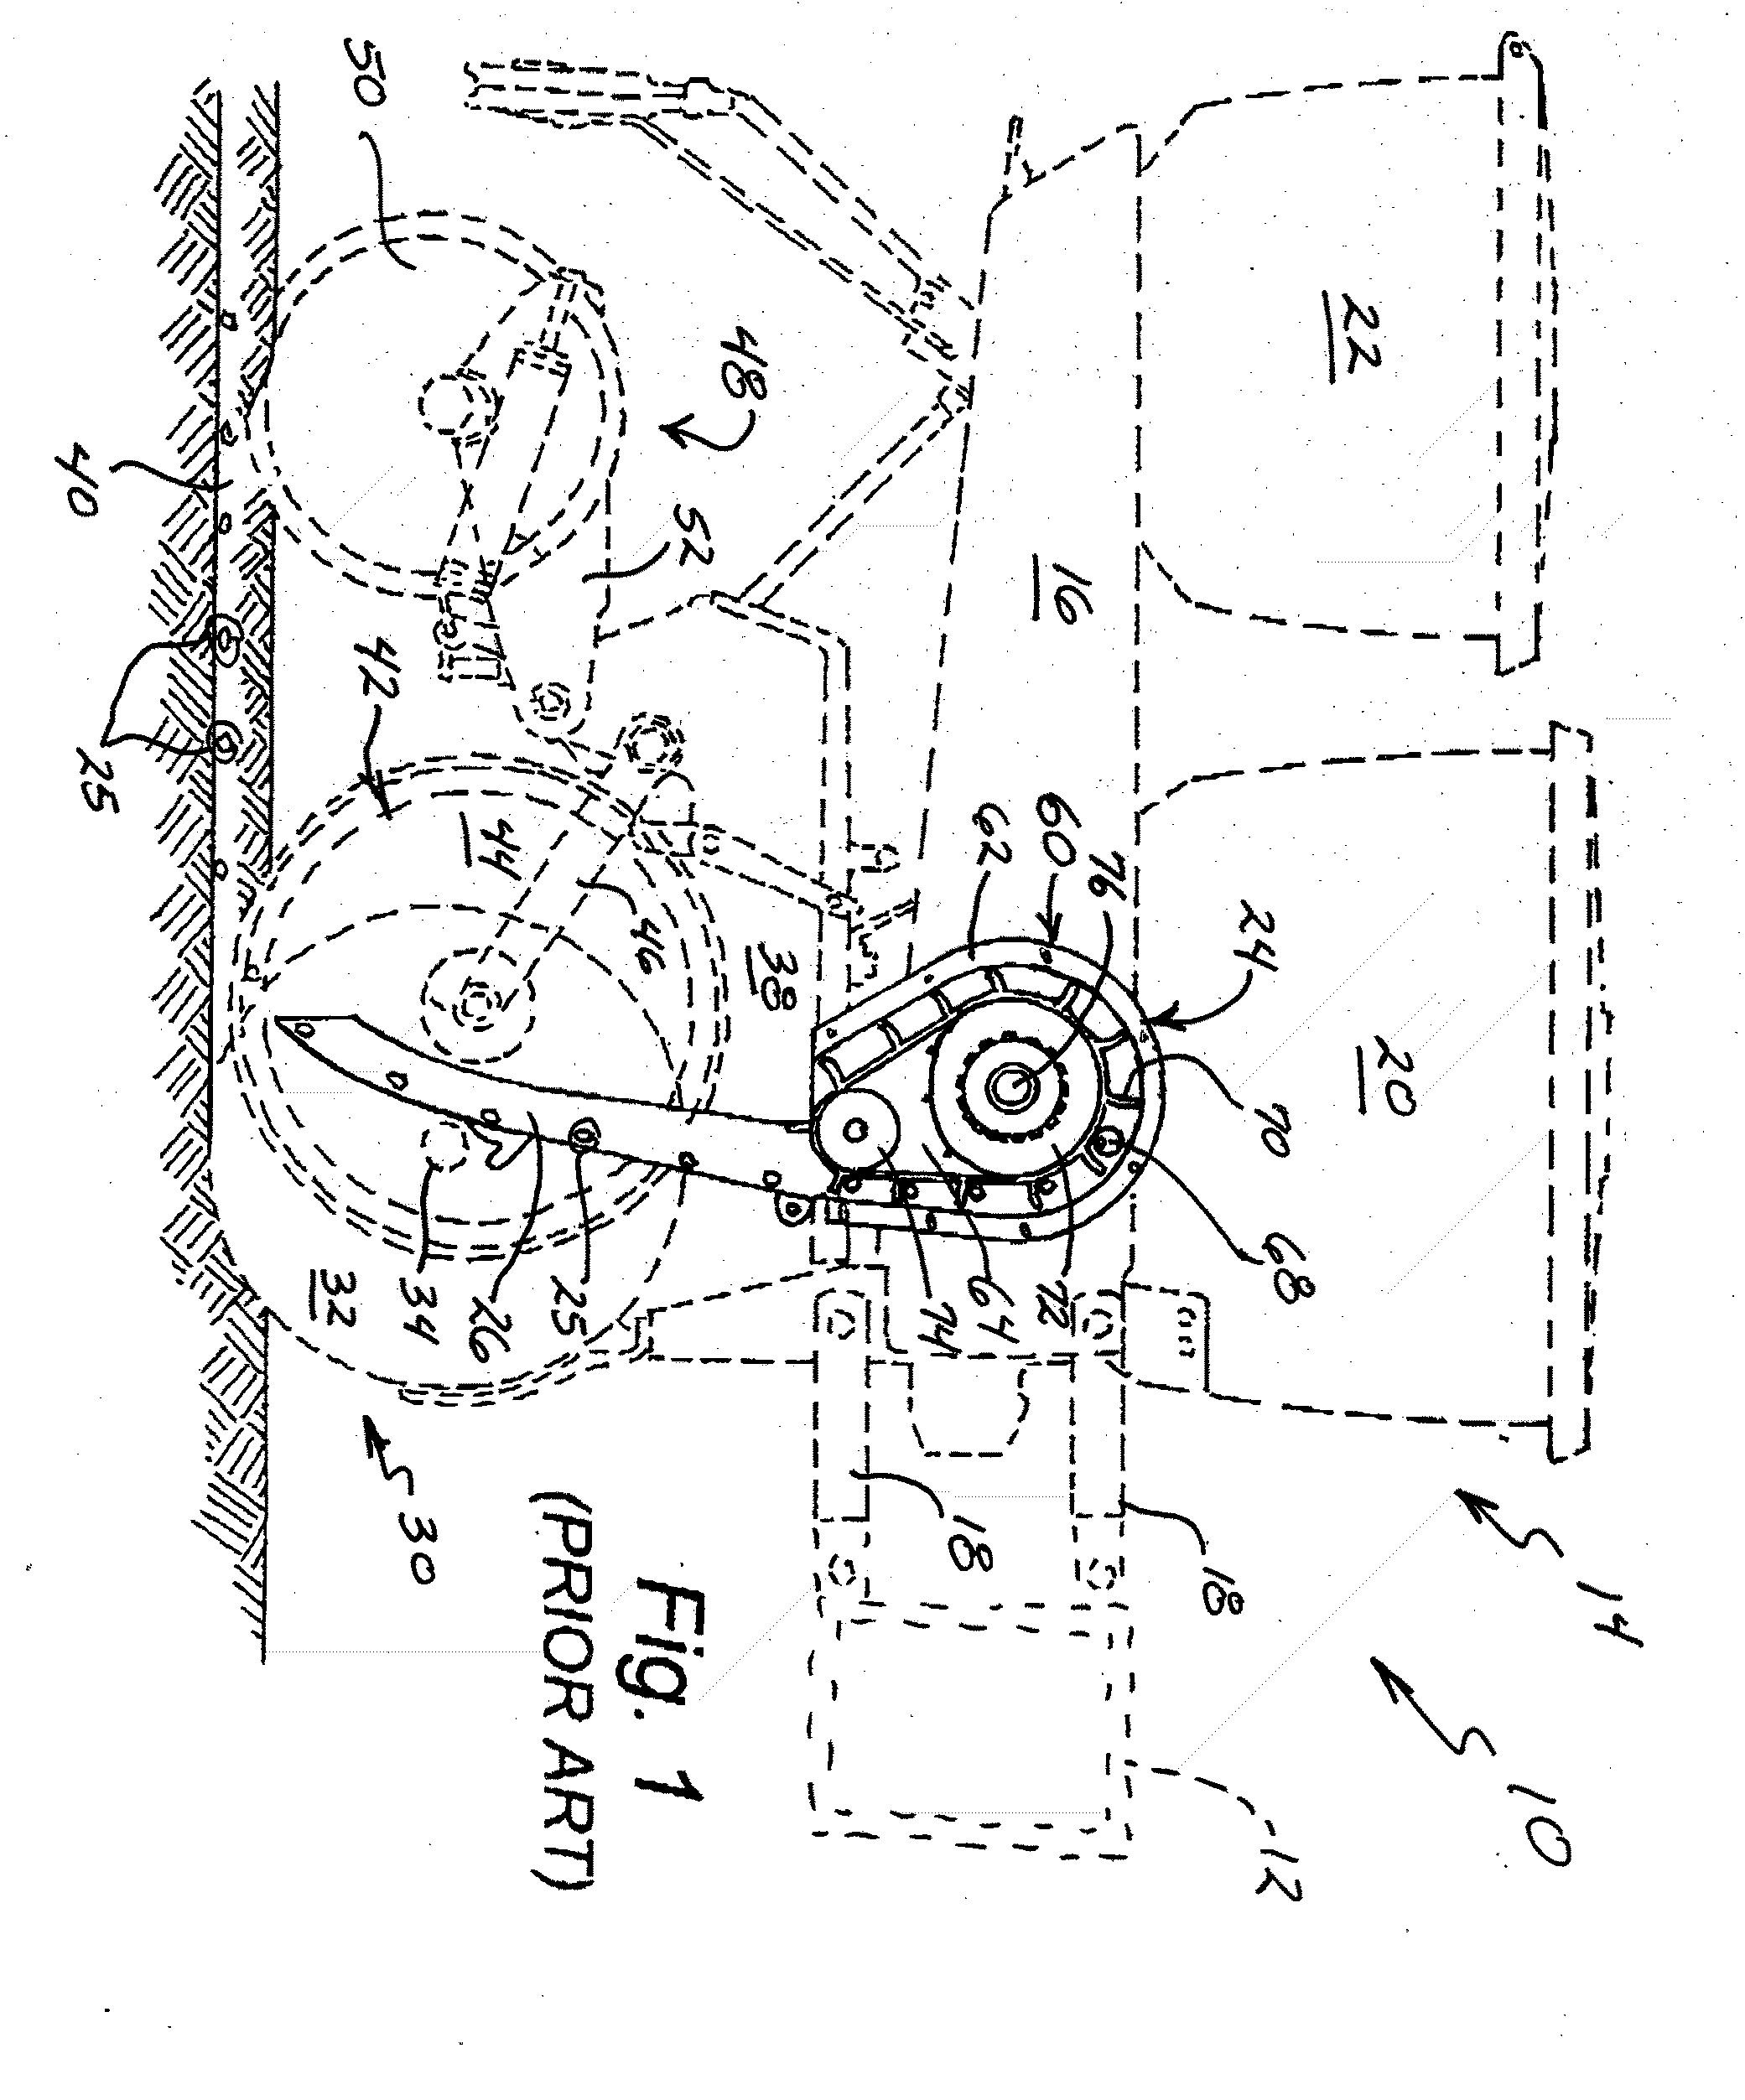 Apparatus and Method for Controlled Delivery of Seeds to an Open Furrow.